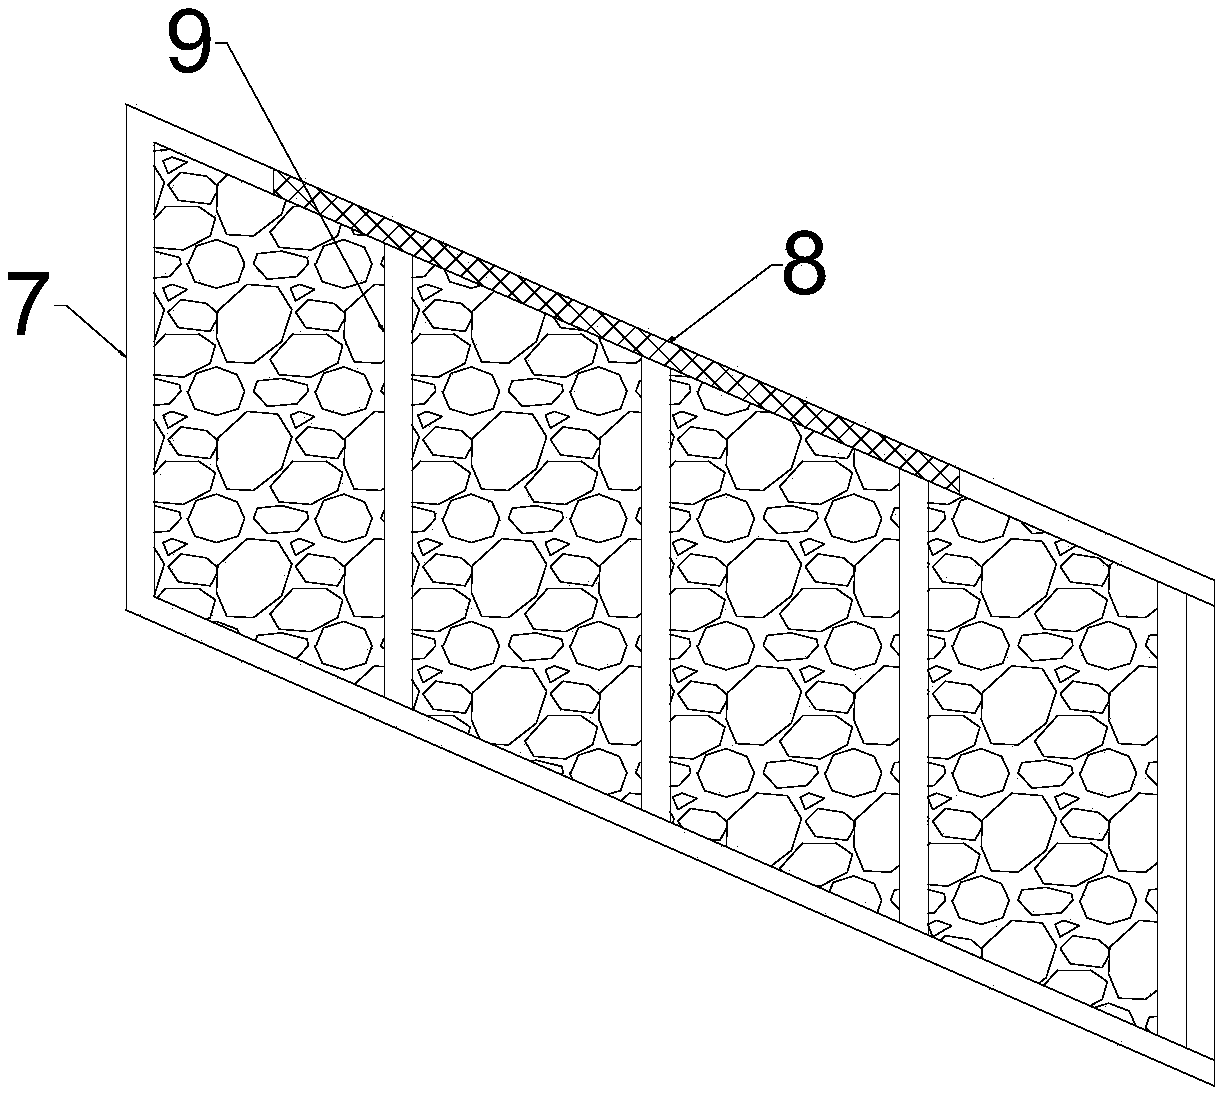 Environment-friendly grass and leaf pulverizing machining treatment device facilitating discharging